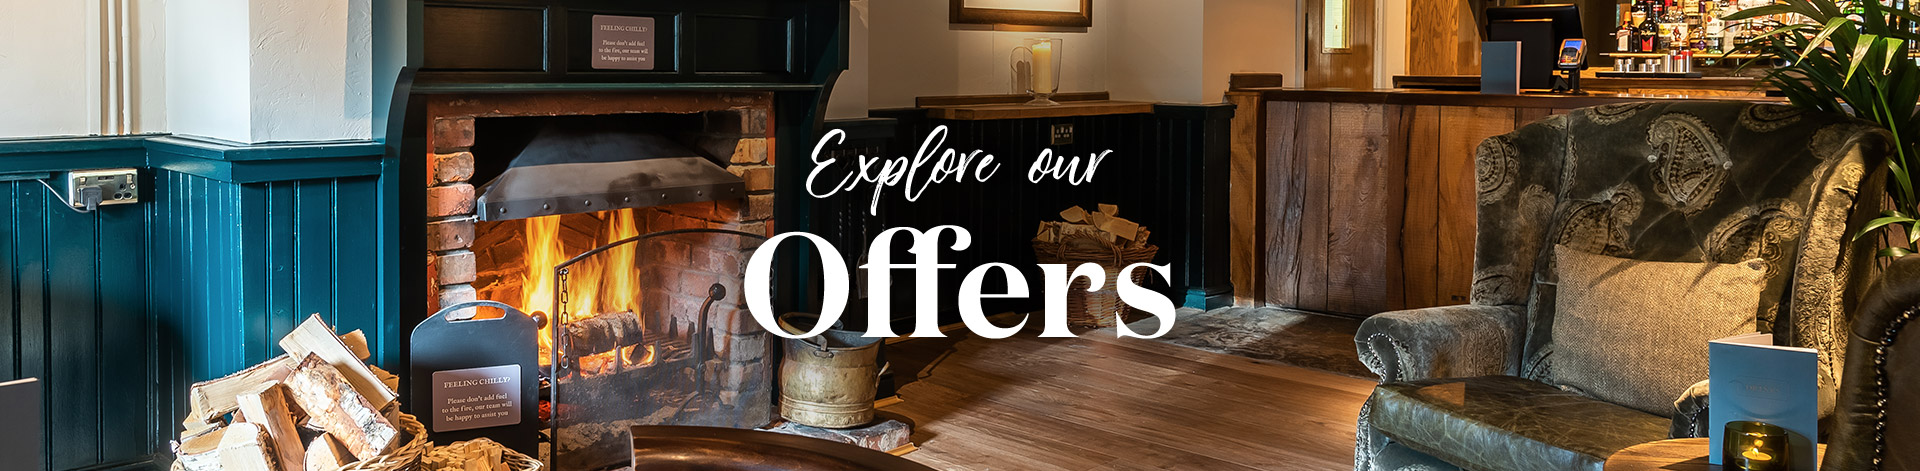 Our latest offers at George & Dragon